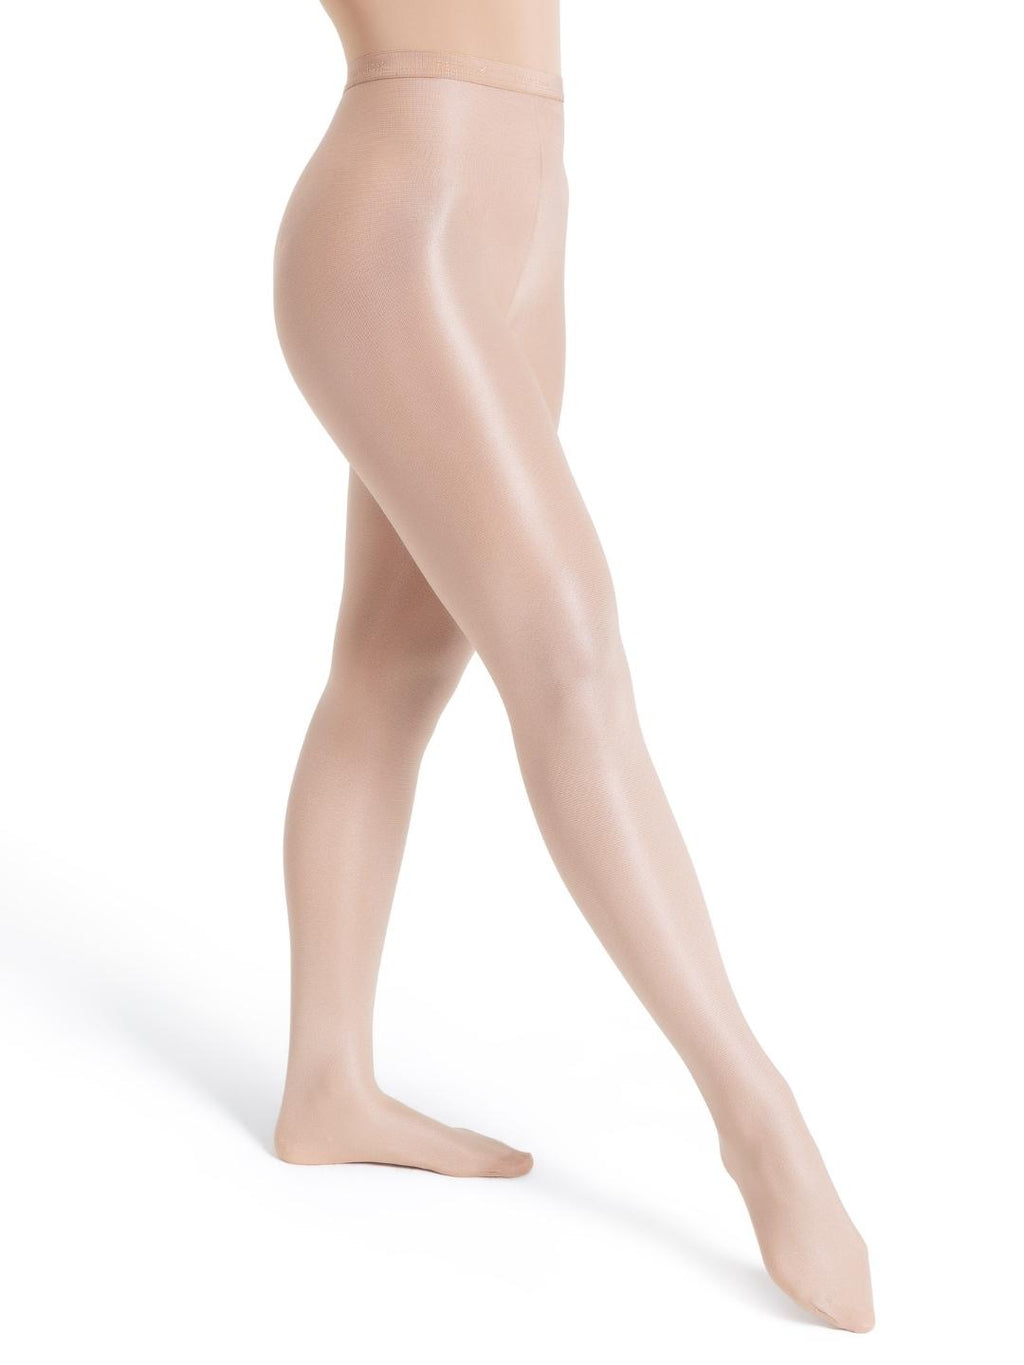 Capezio Ultra Shimmery Footed Tights | Adult